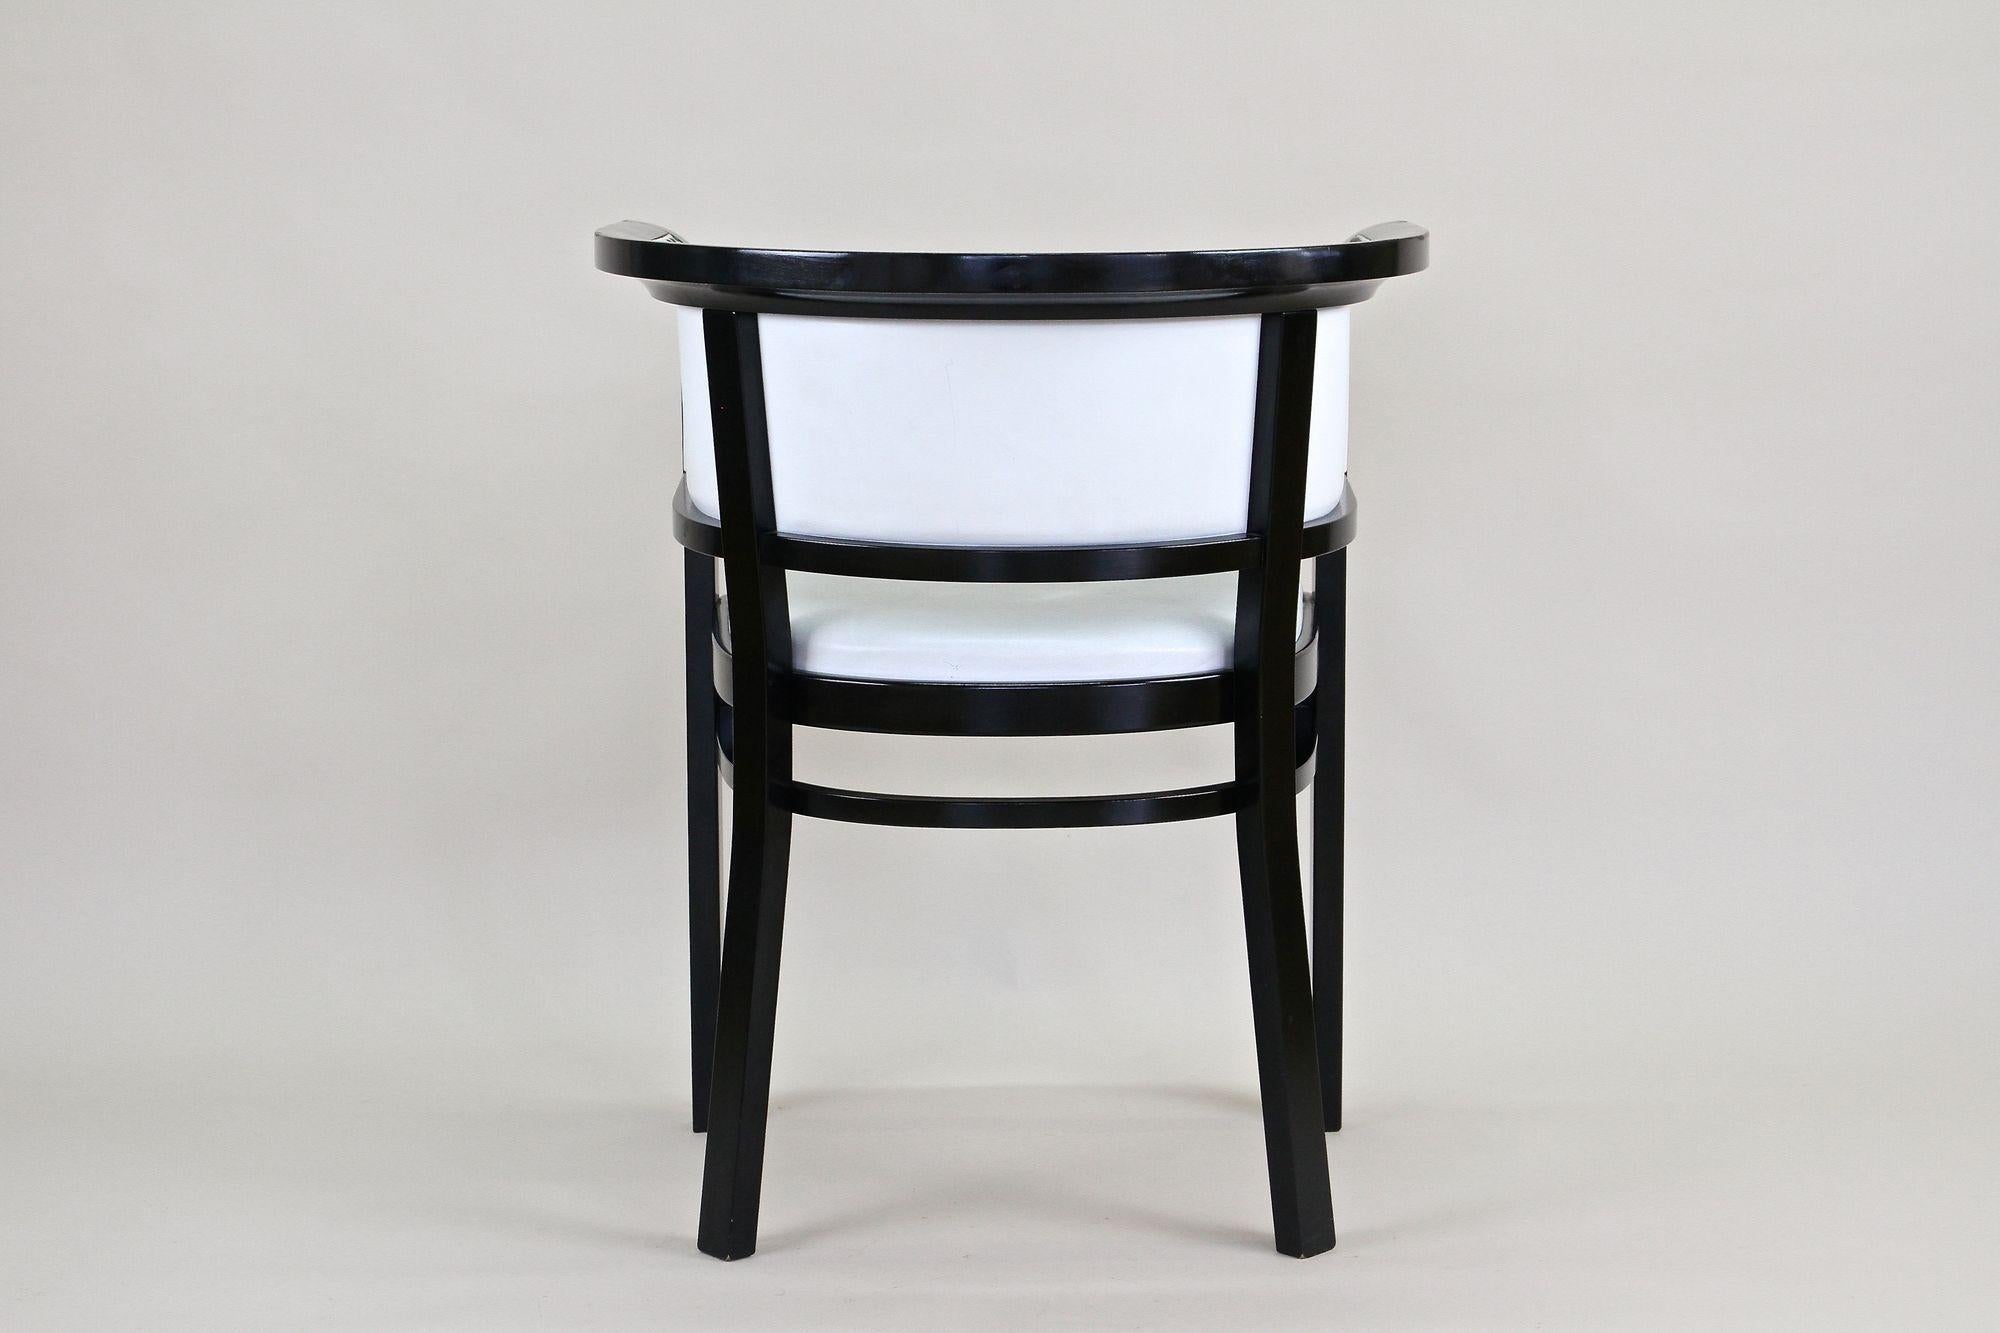 Black Thonet Armchair with White Leather, Design Marcel Kammerer, at circa 1980 For Sale 5